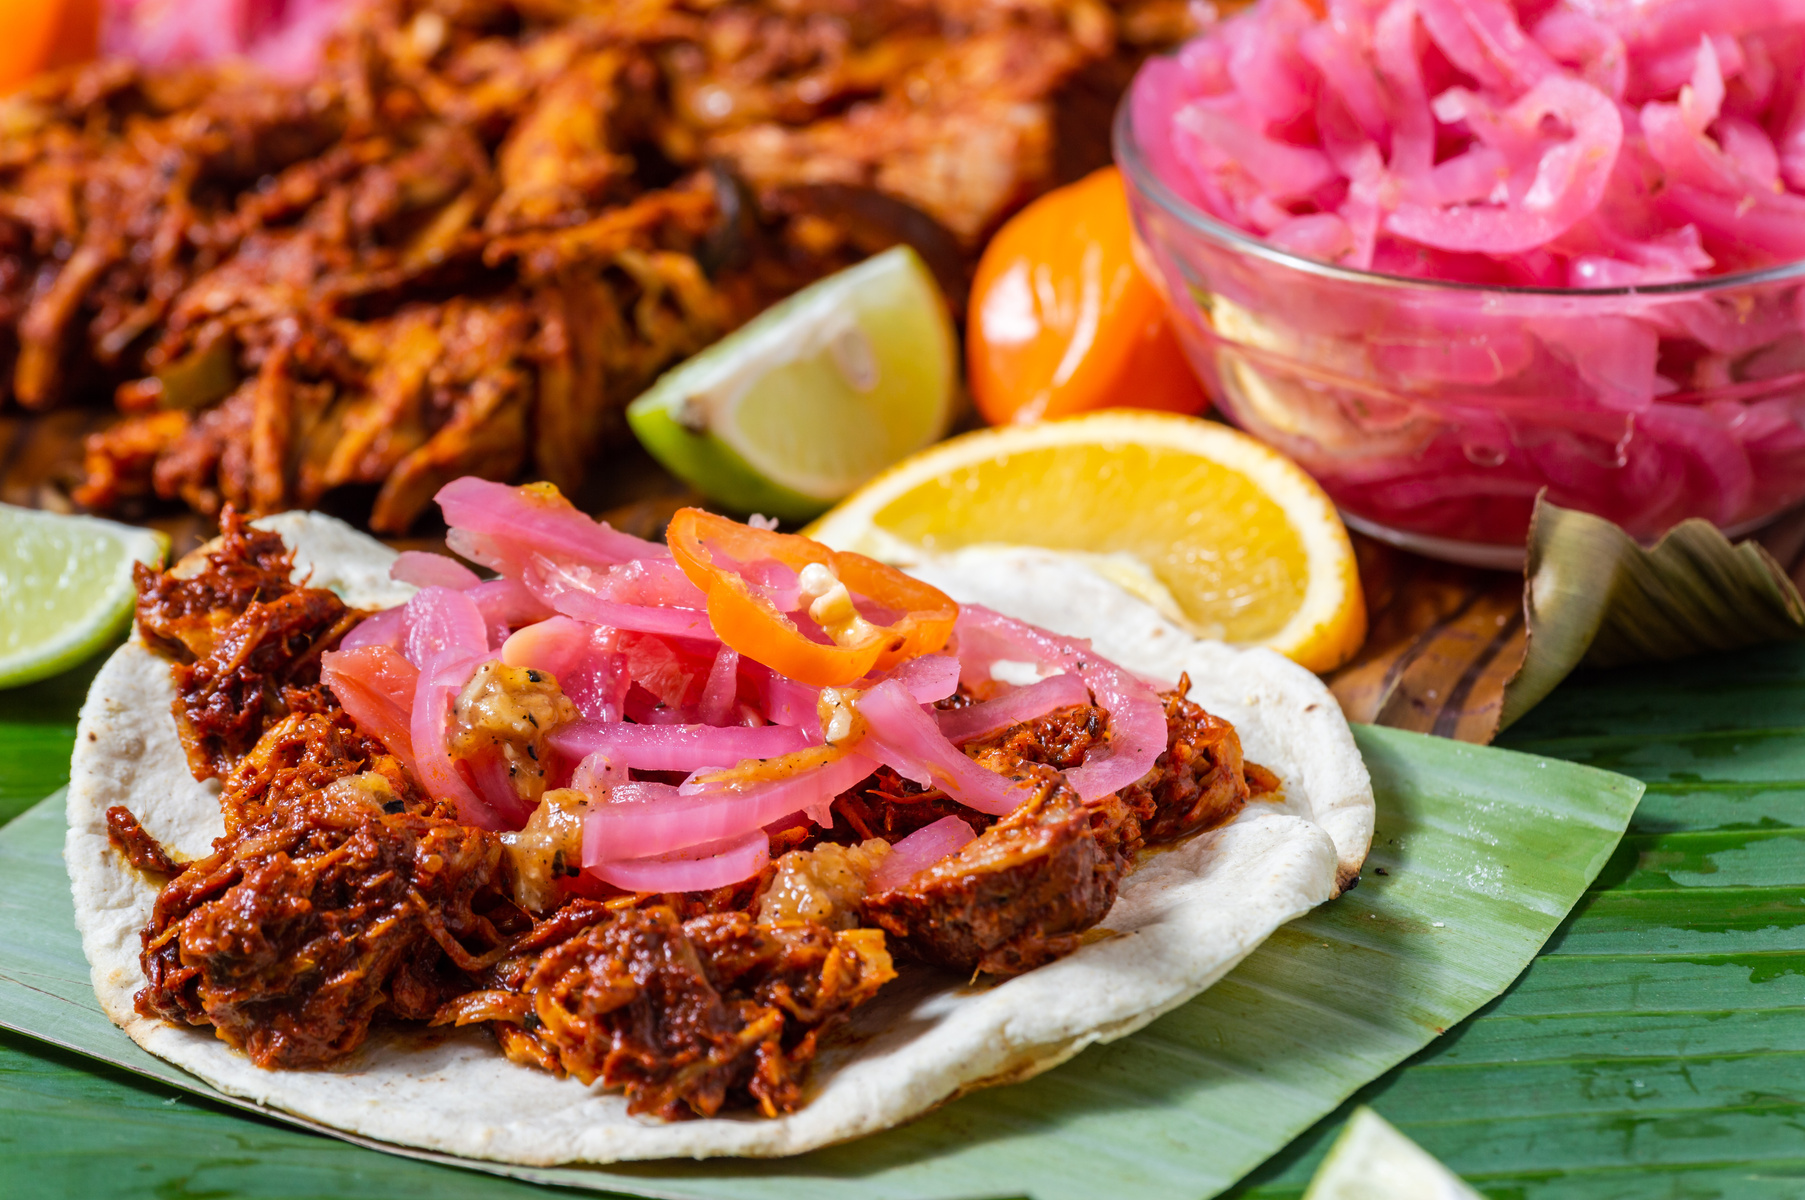 Tostadas of cochinita pibil, served with traditional condiments